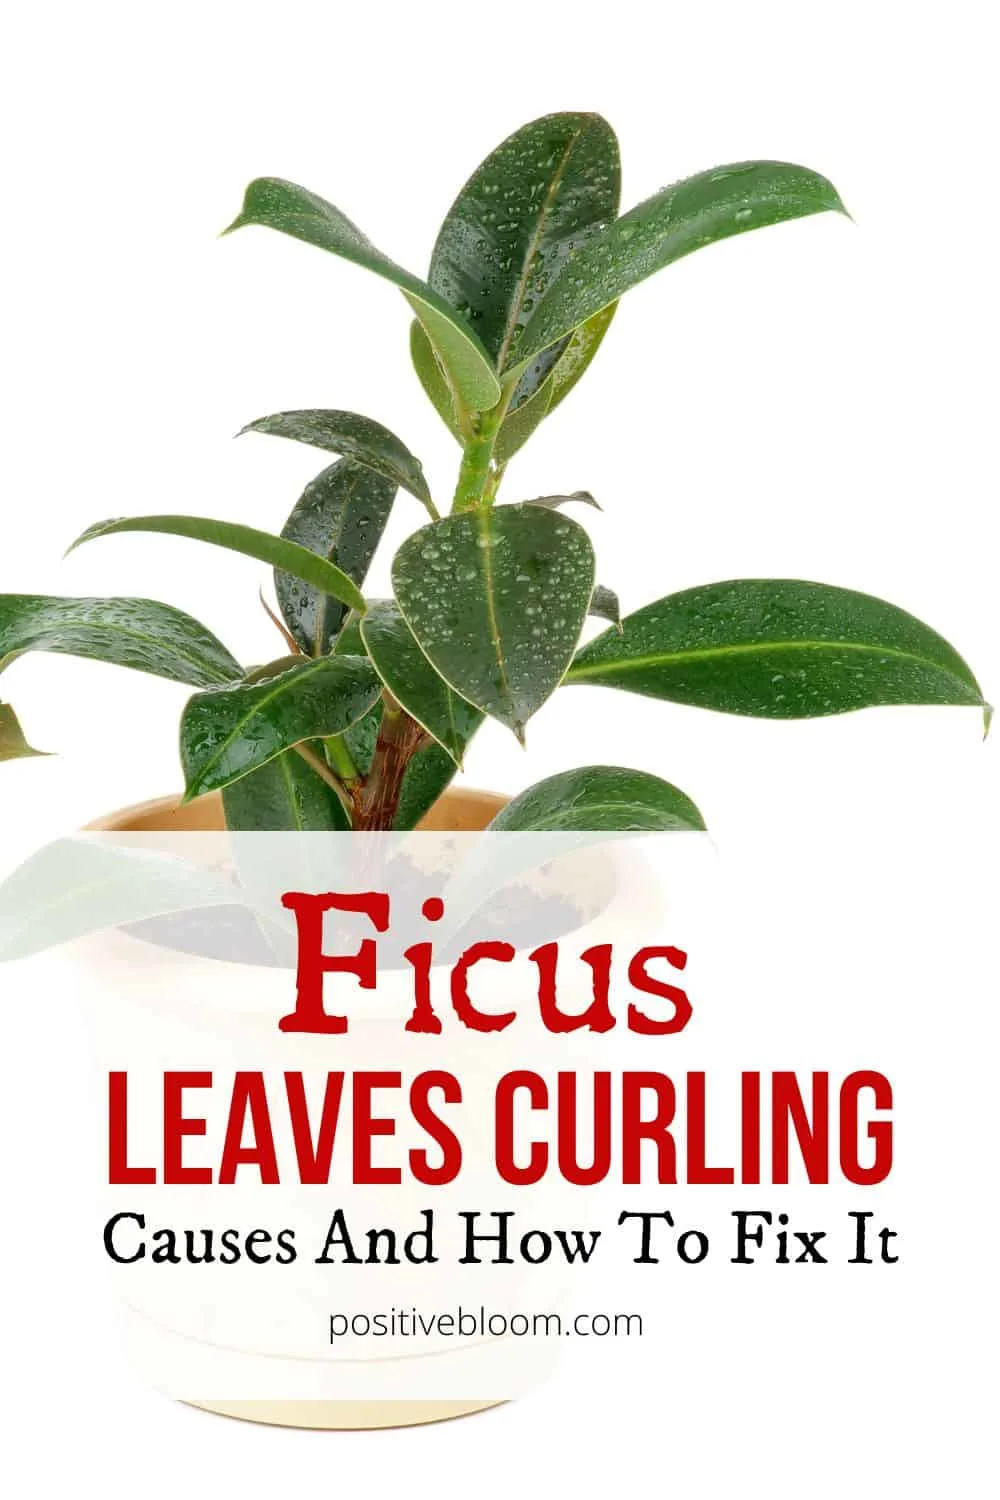 The Causes Of Ficus Leaves Curling And How To Fix Them